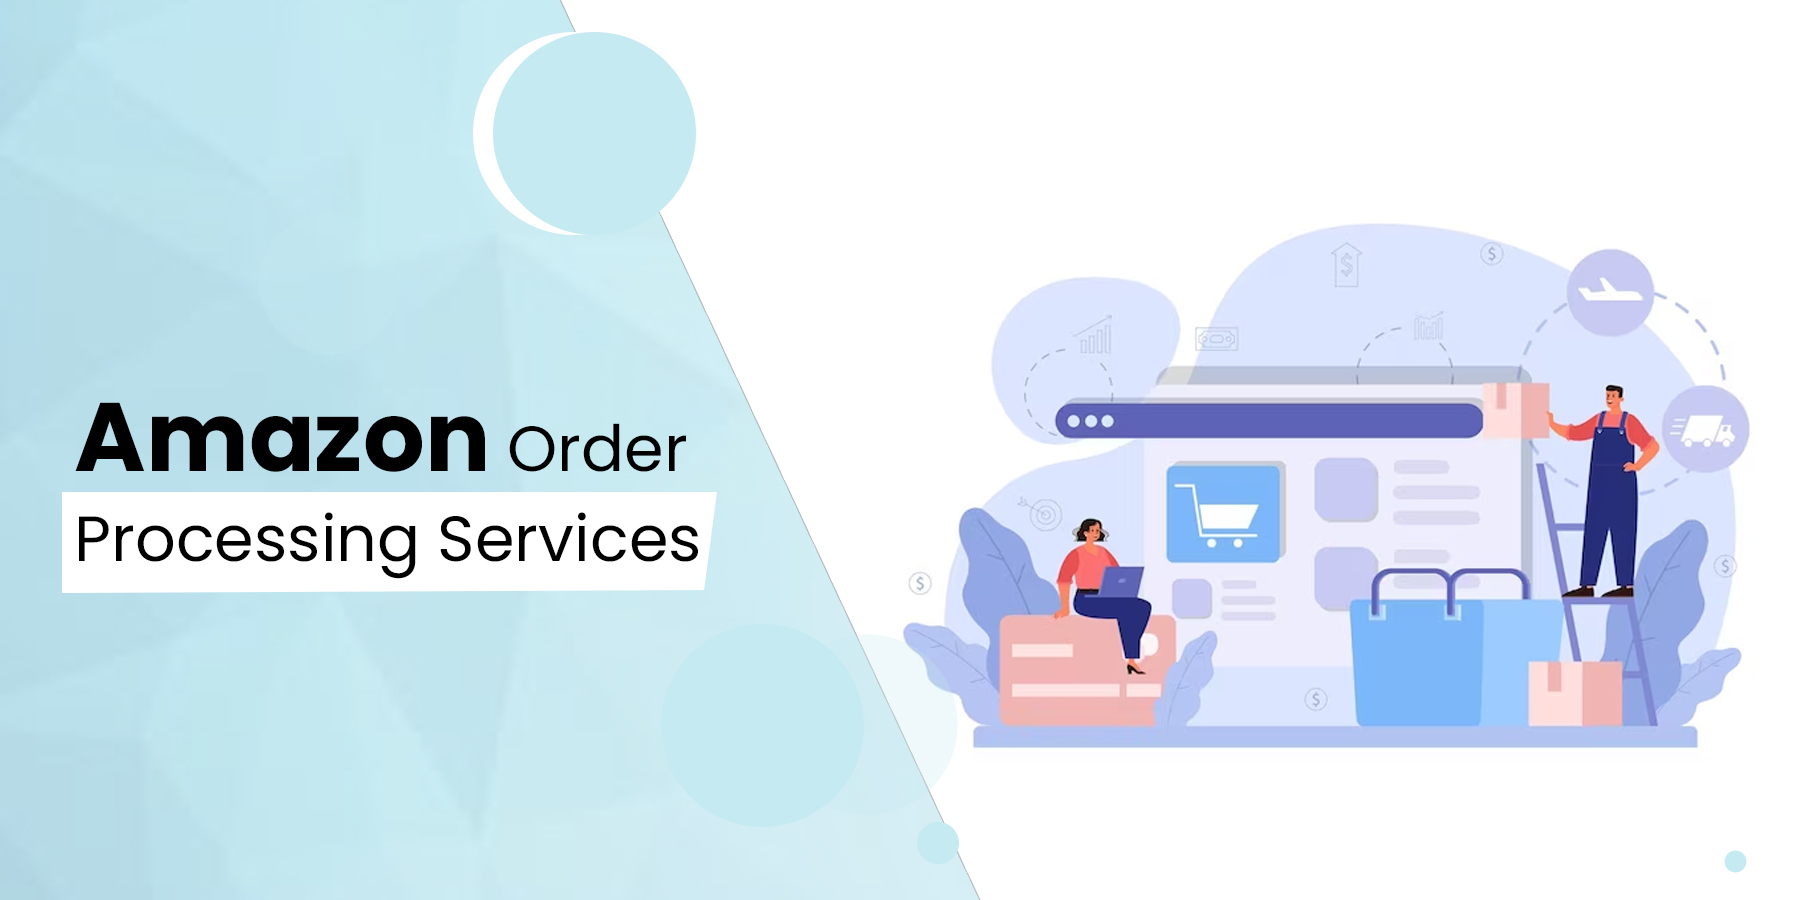 Amazon Order Processing Services